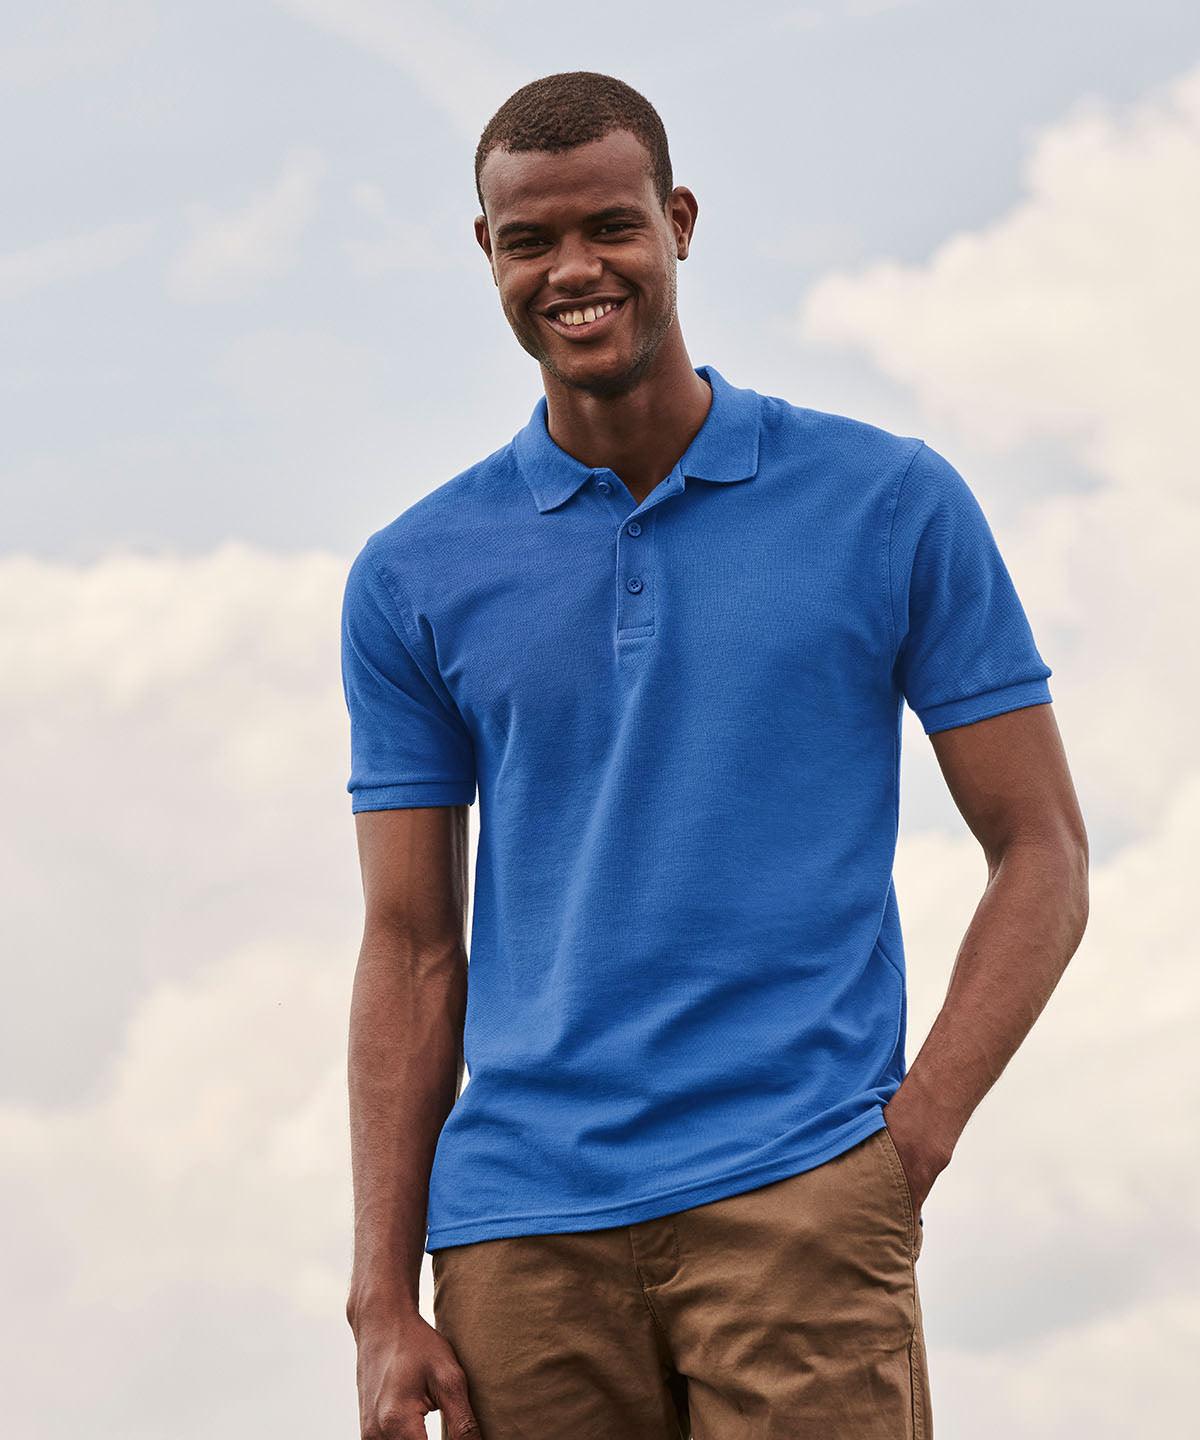 Sunflower - Premium polo Polos Fruit of the Loom 2022 Spring Edit, Fruit of the Loom Polos, Must Haves, New Colours For 2022, Plus Sizes, Polos & Casual, Raladeal - Recently Added Schoolwear Centres